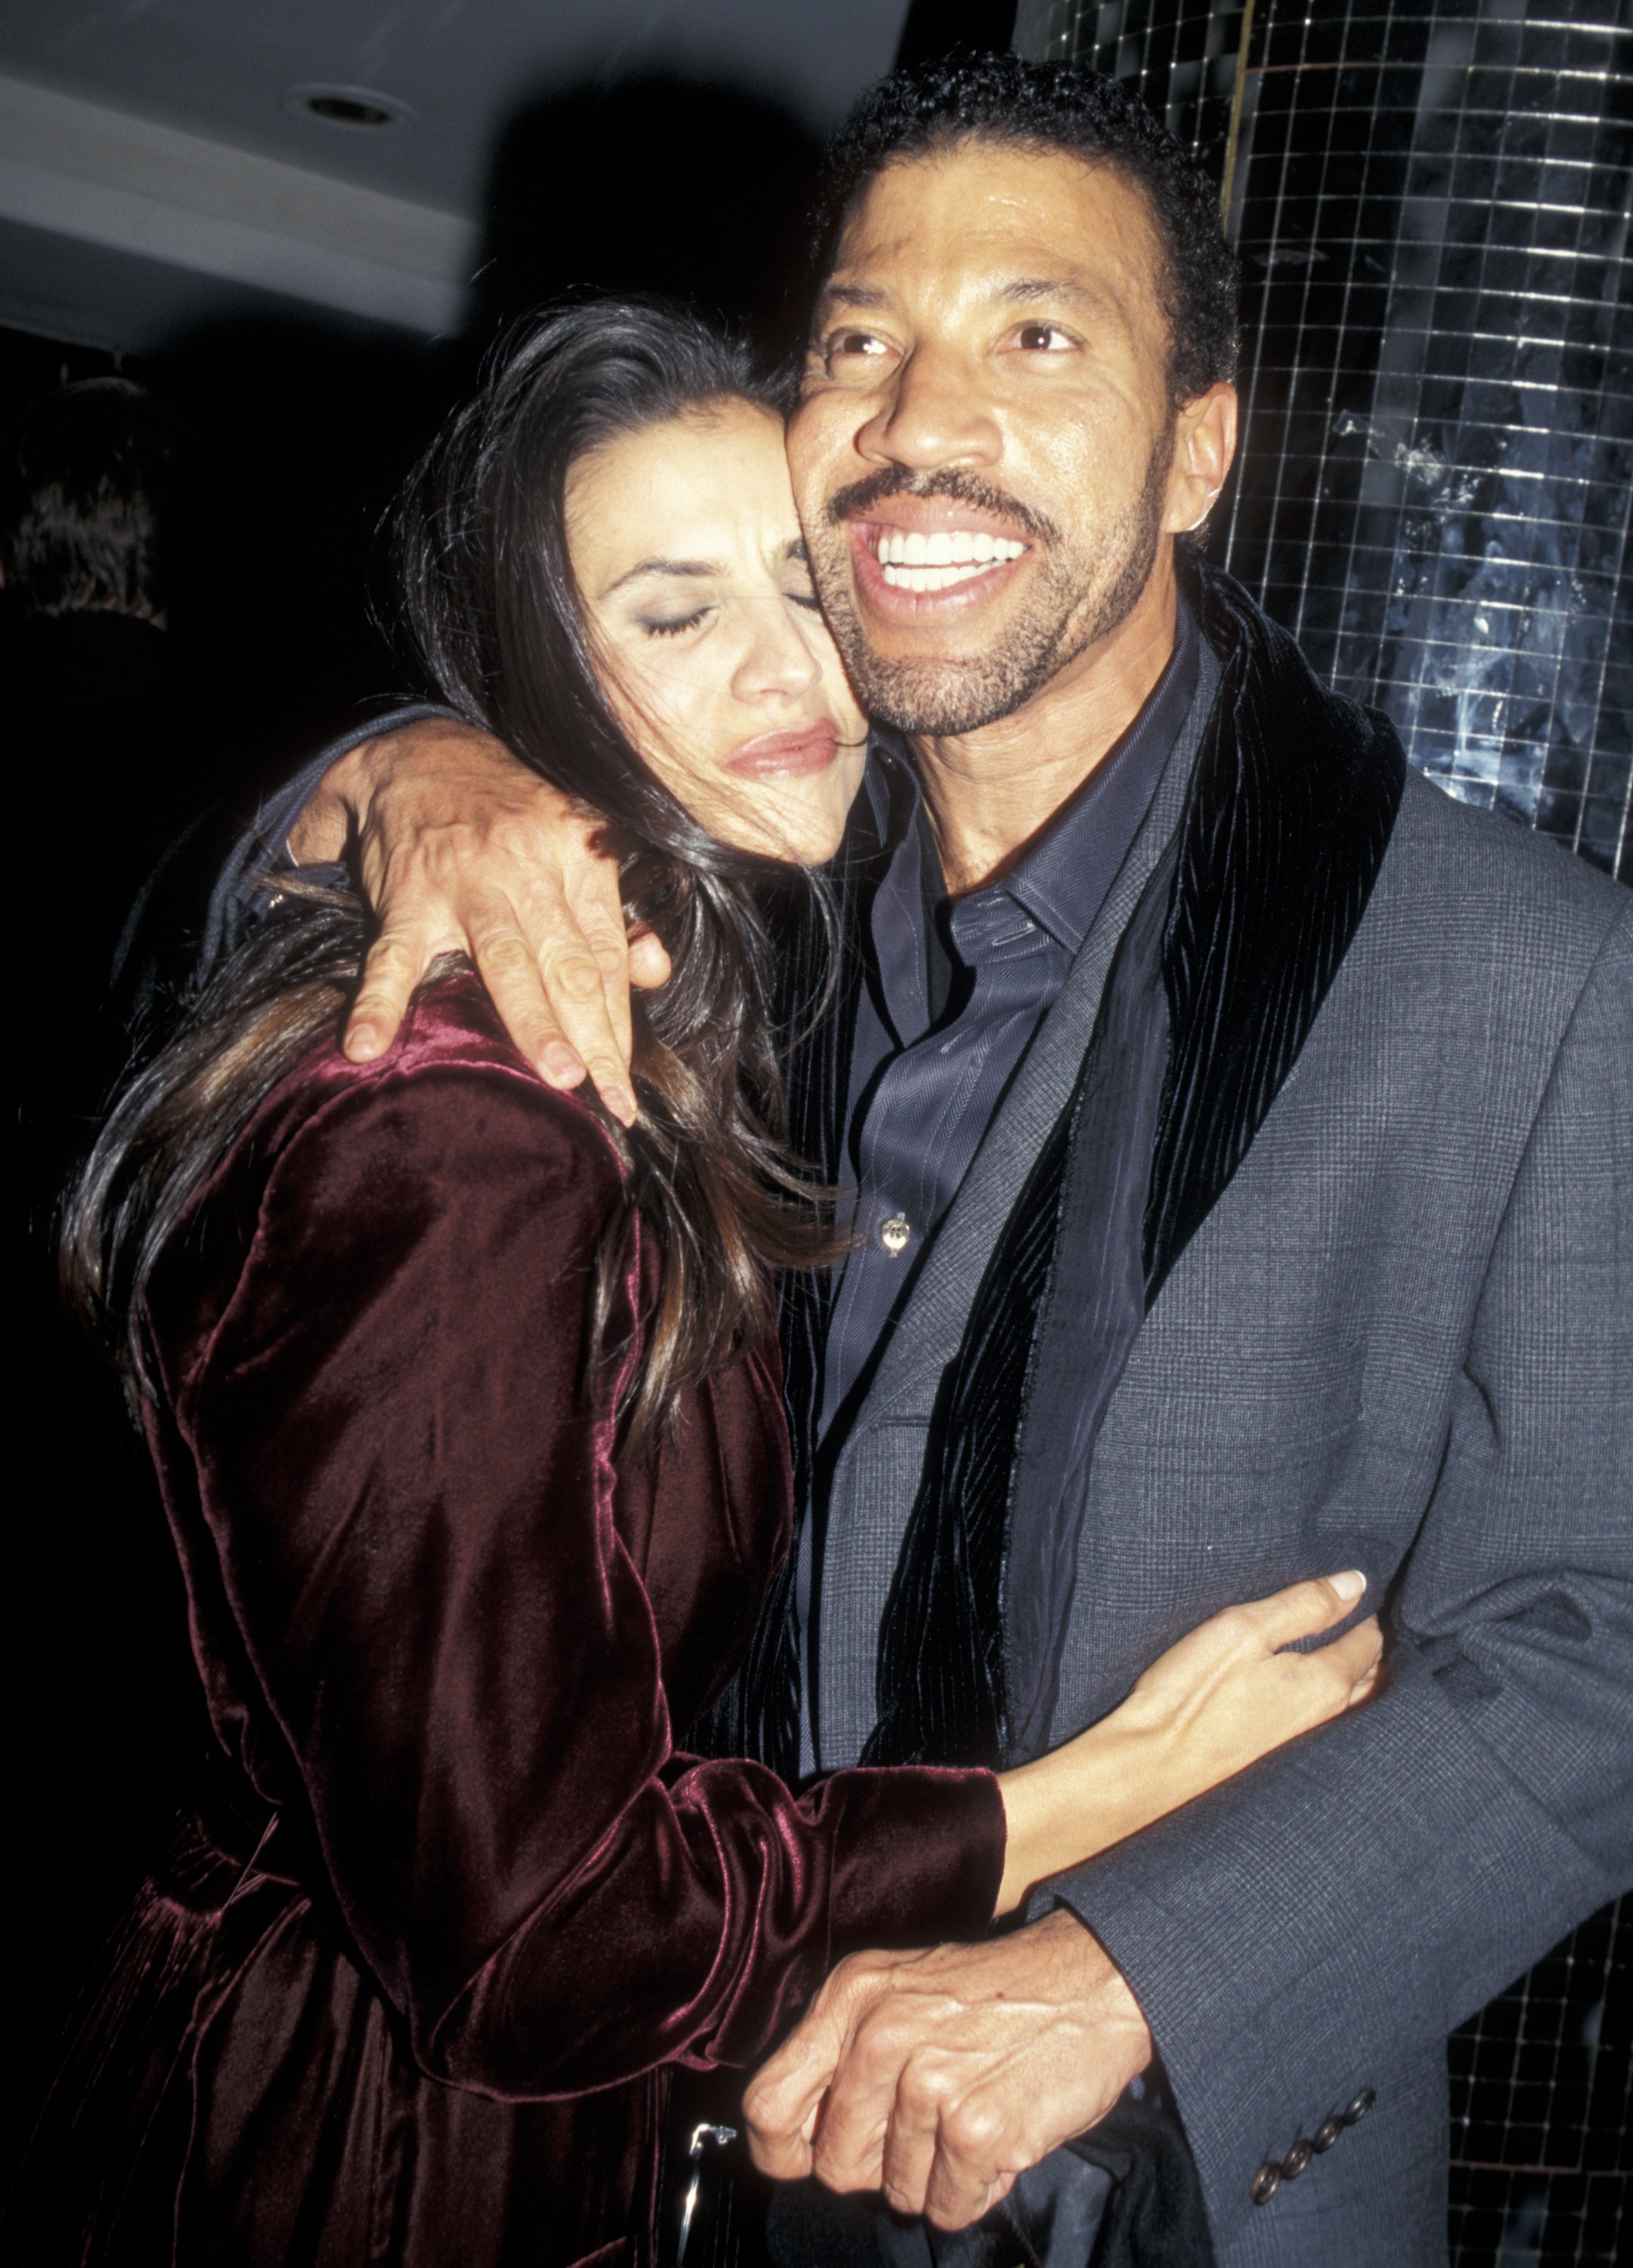 Lionel Richie and Diane Alexander during the premiere of "The Preacher's Wife" on December 9, 1996, at the Ziegfeld Theater in New York City. | Source: Getty Images